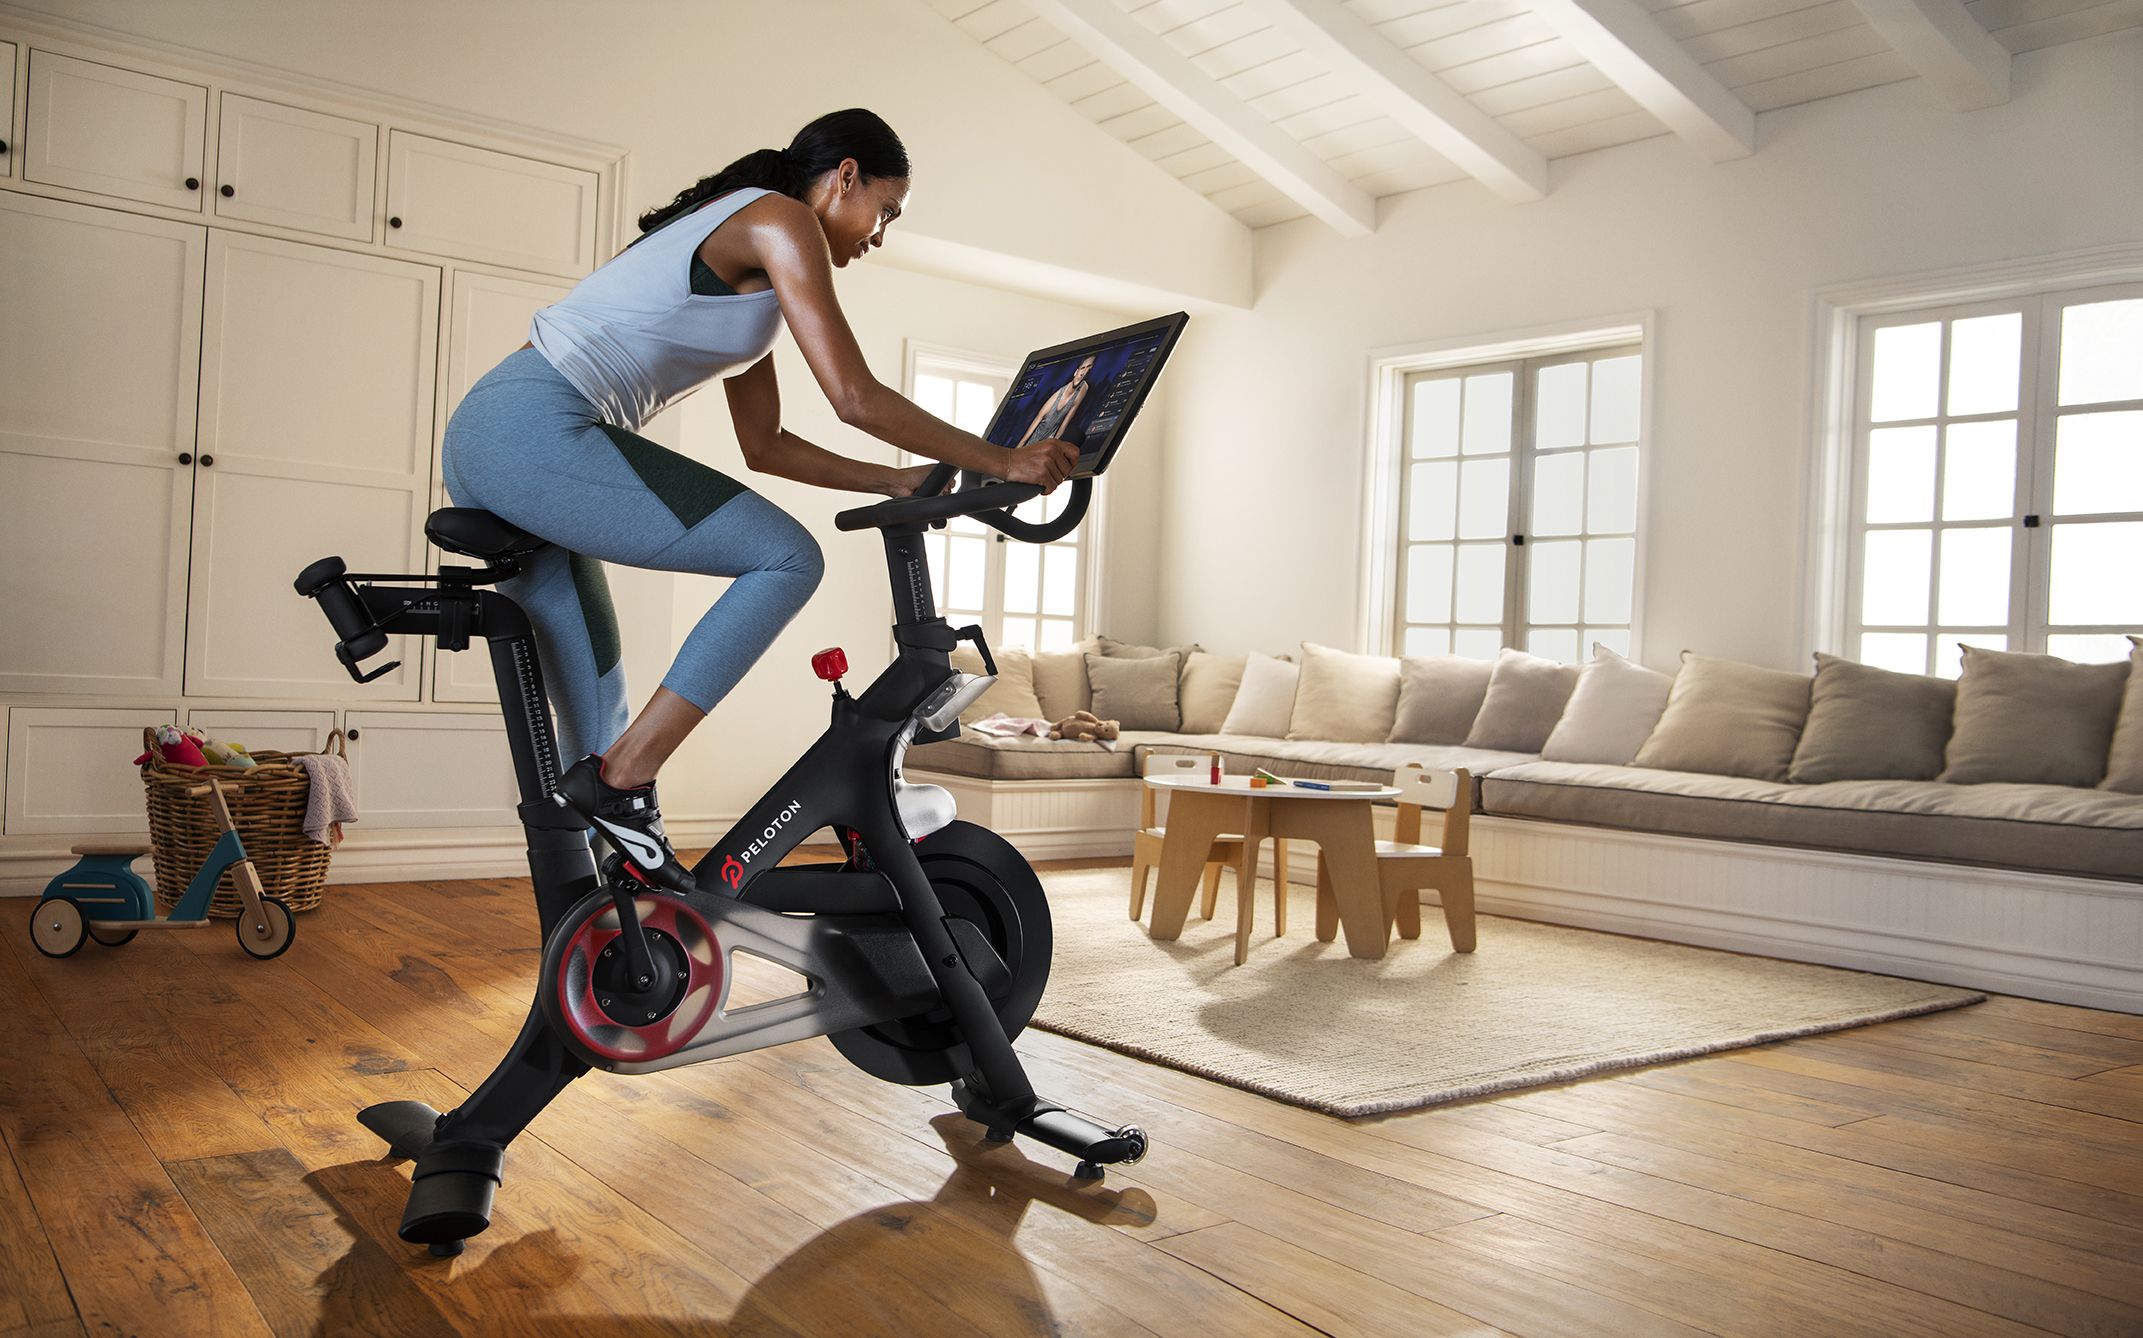 Peloton Workout: A Fun Way to Stay Fit